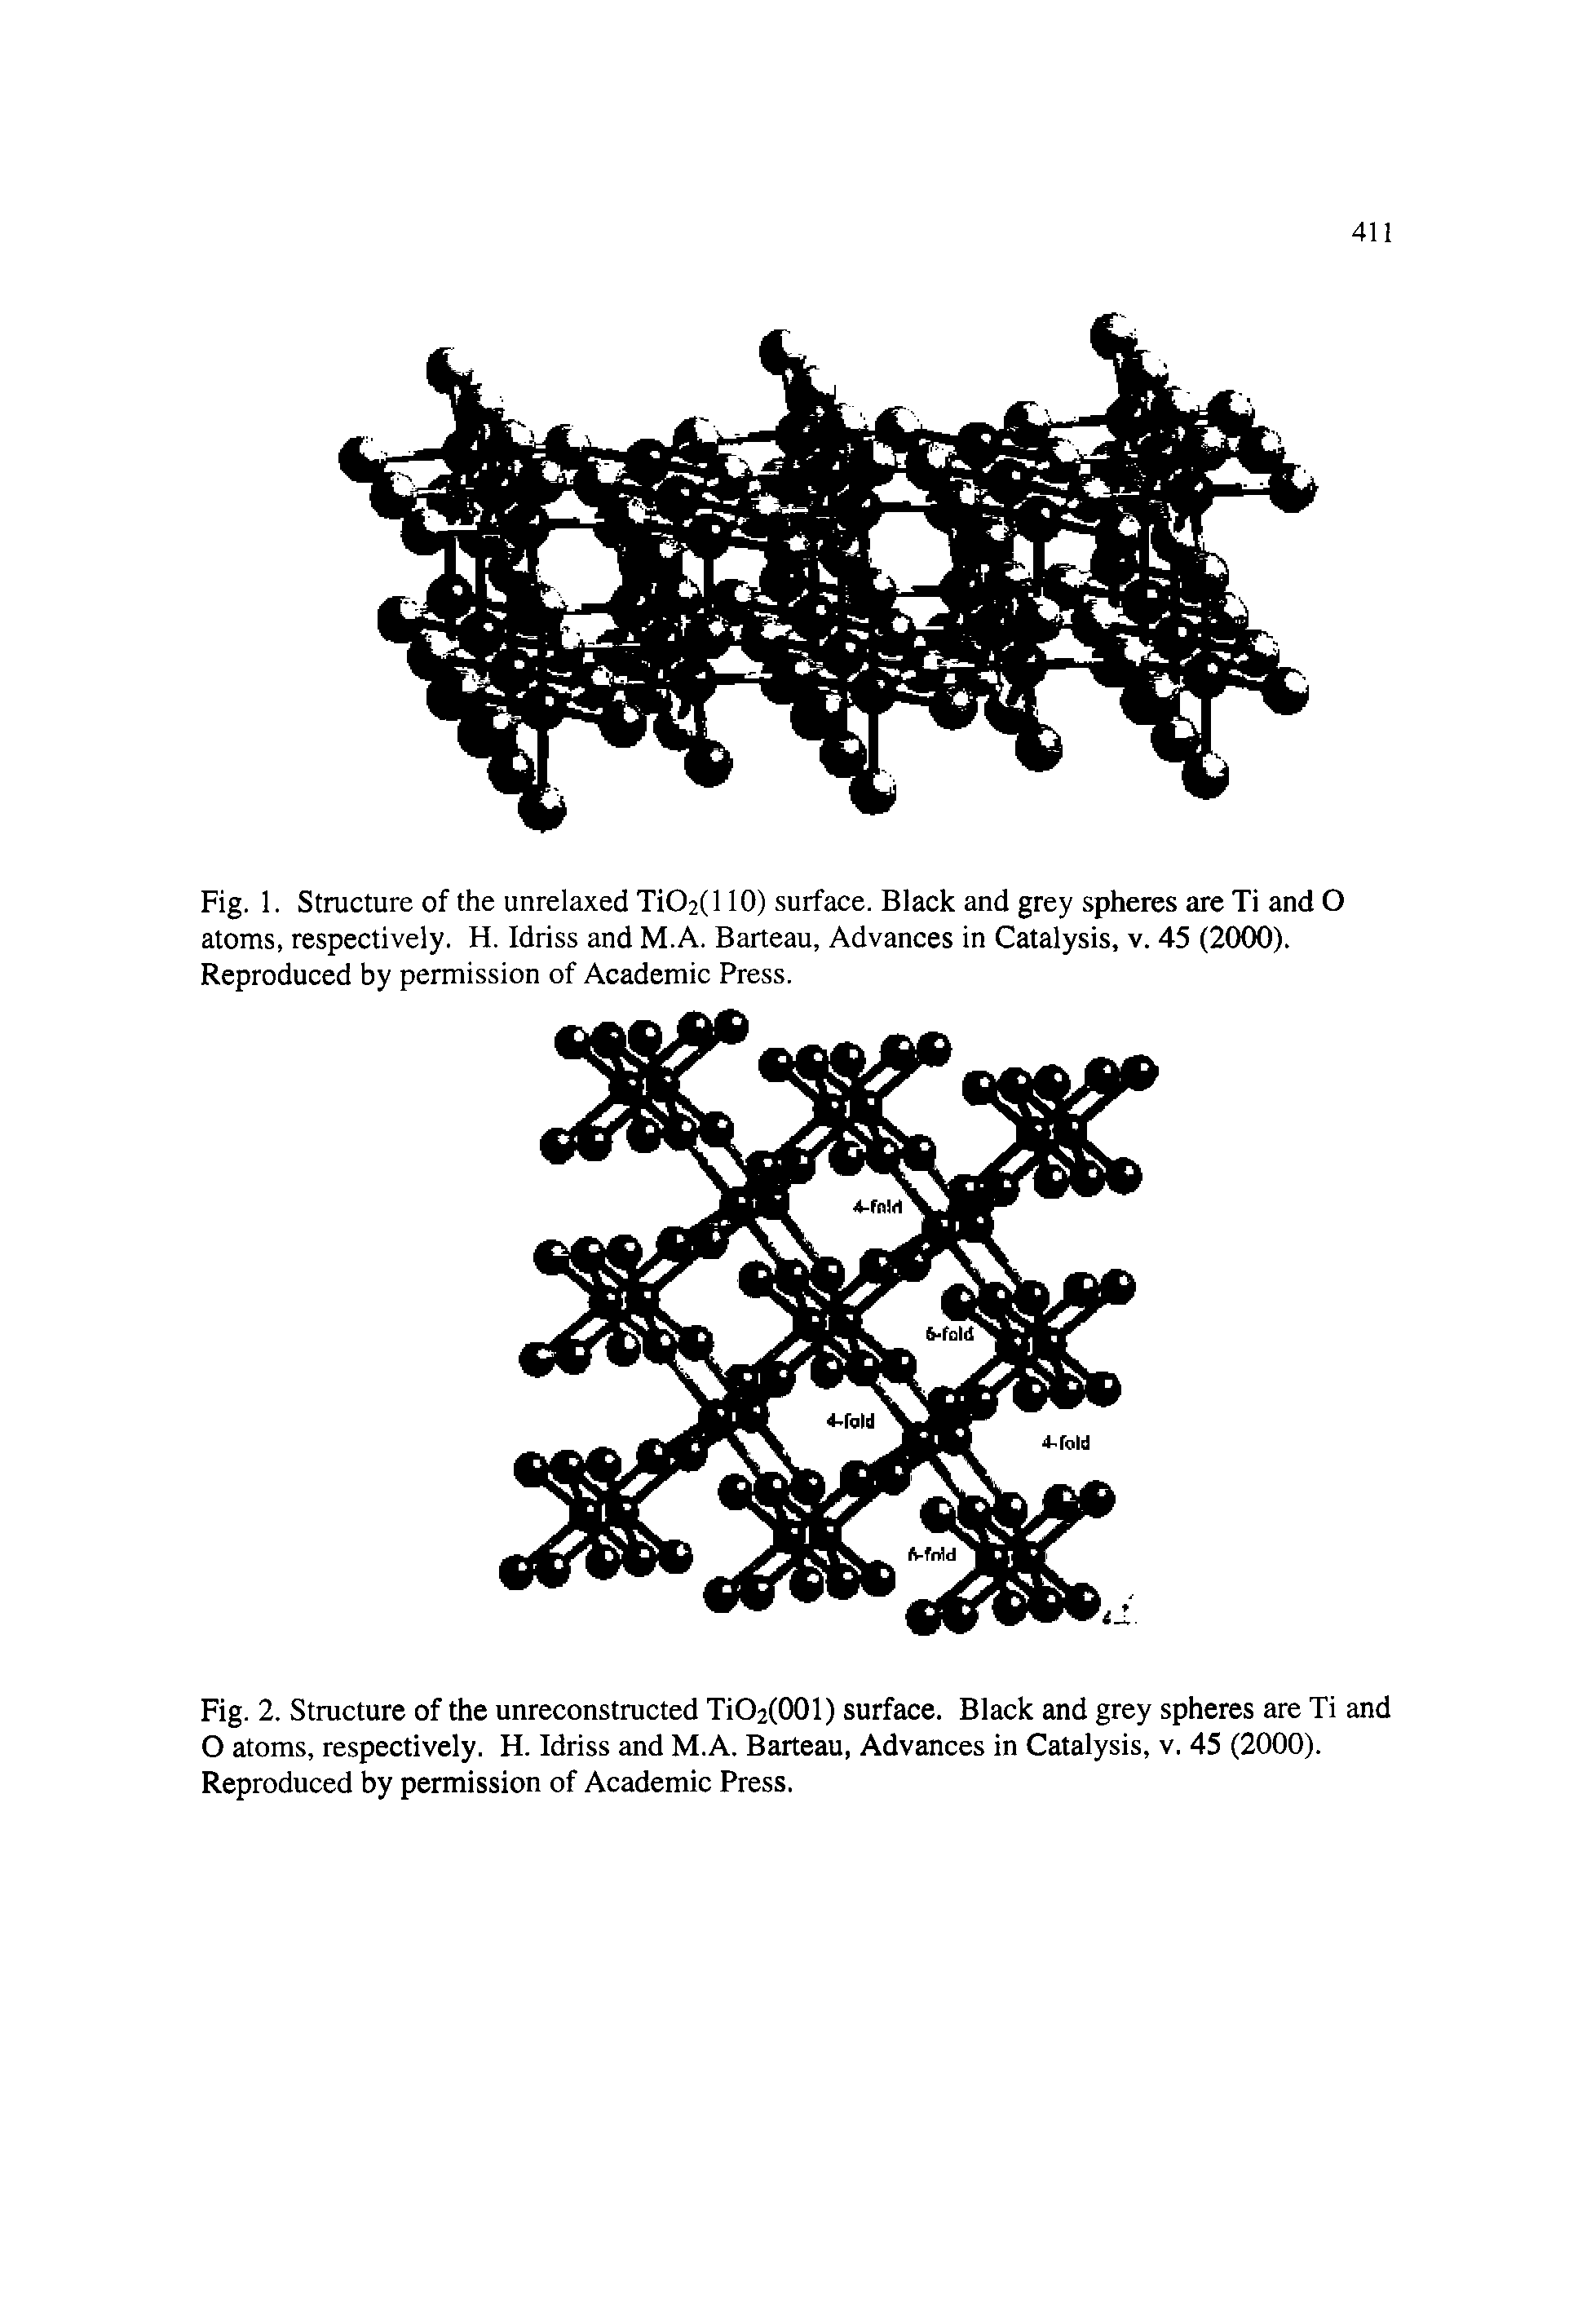 Fig. 2. Structure of the unreconstructed TiO2(001) surface. Black and grey spheres are Ti and O atoms, respectively. H. Idriss and M.A. Barteau, Advances in Catalysis, v. 45 (2000). Reproduced by permission of Academic Press.